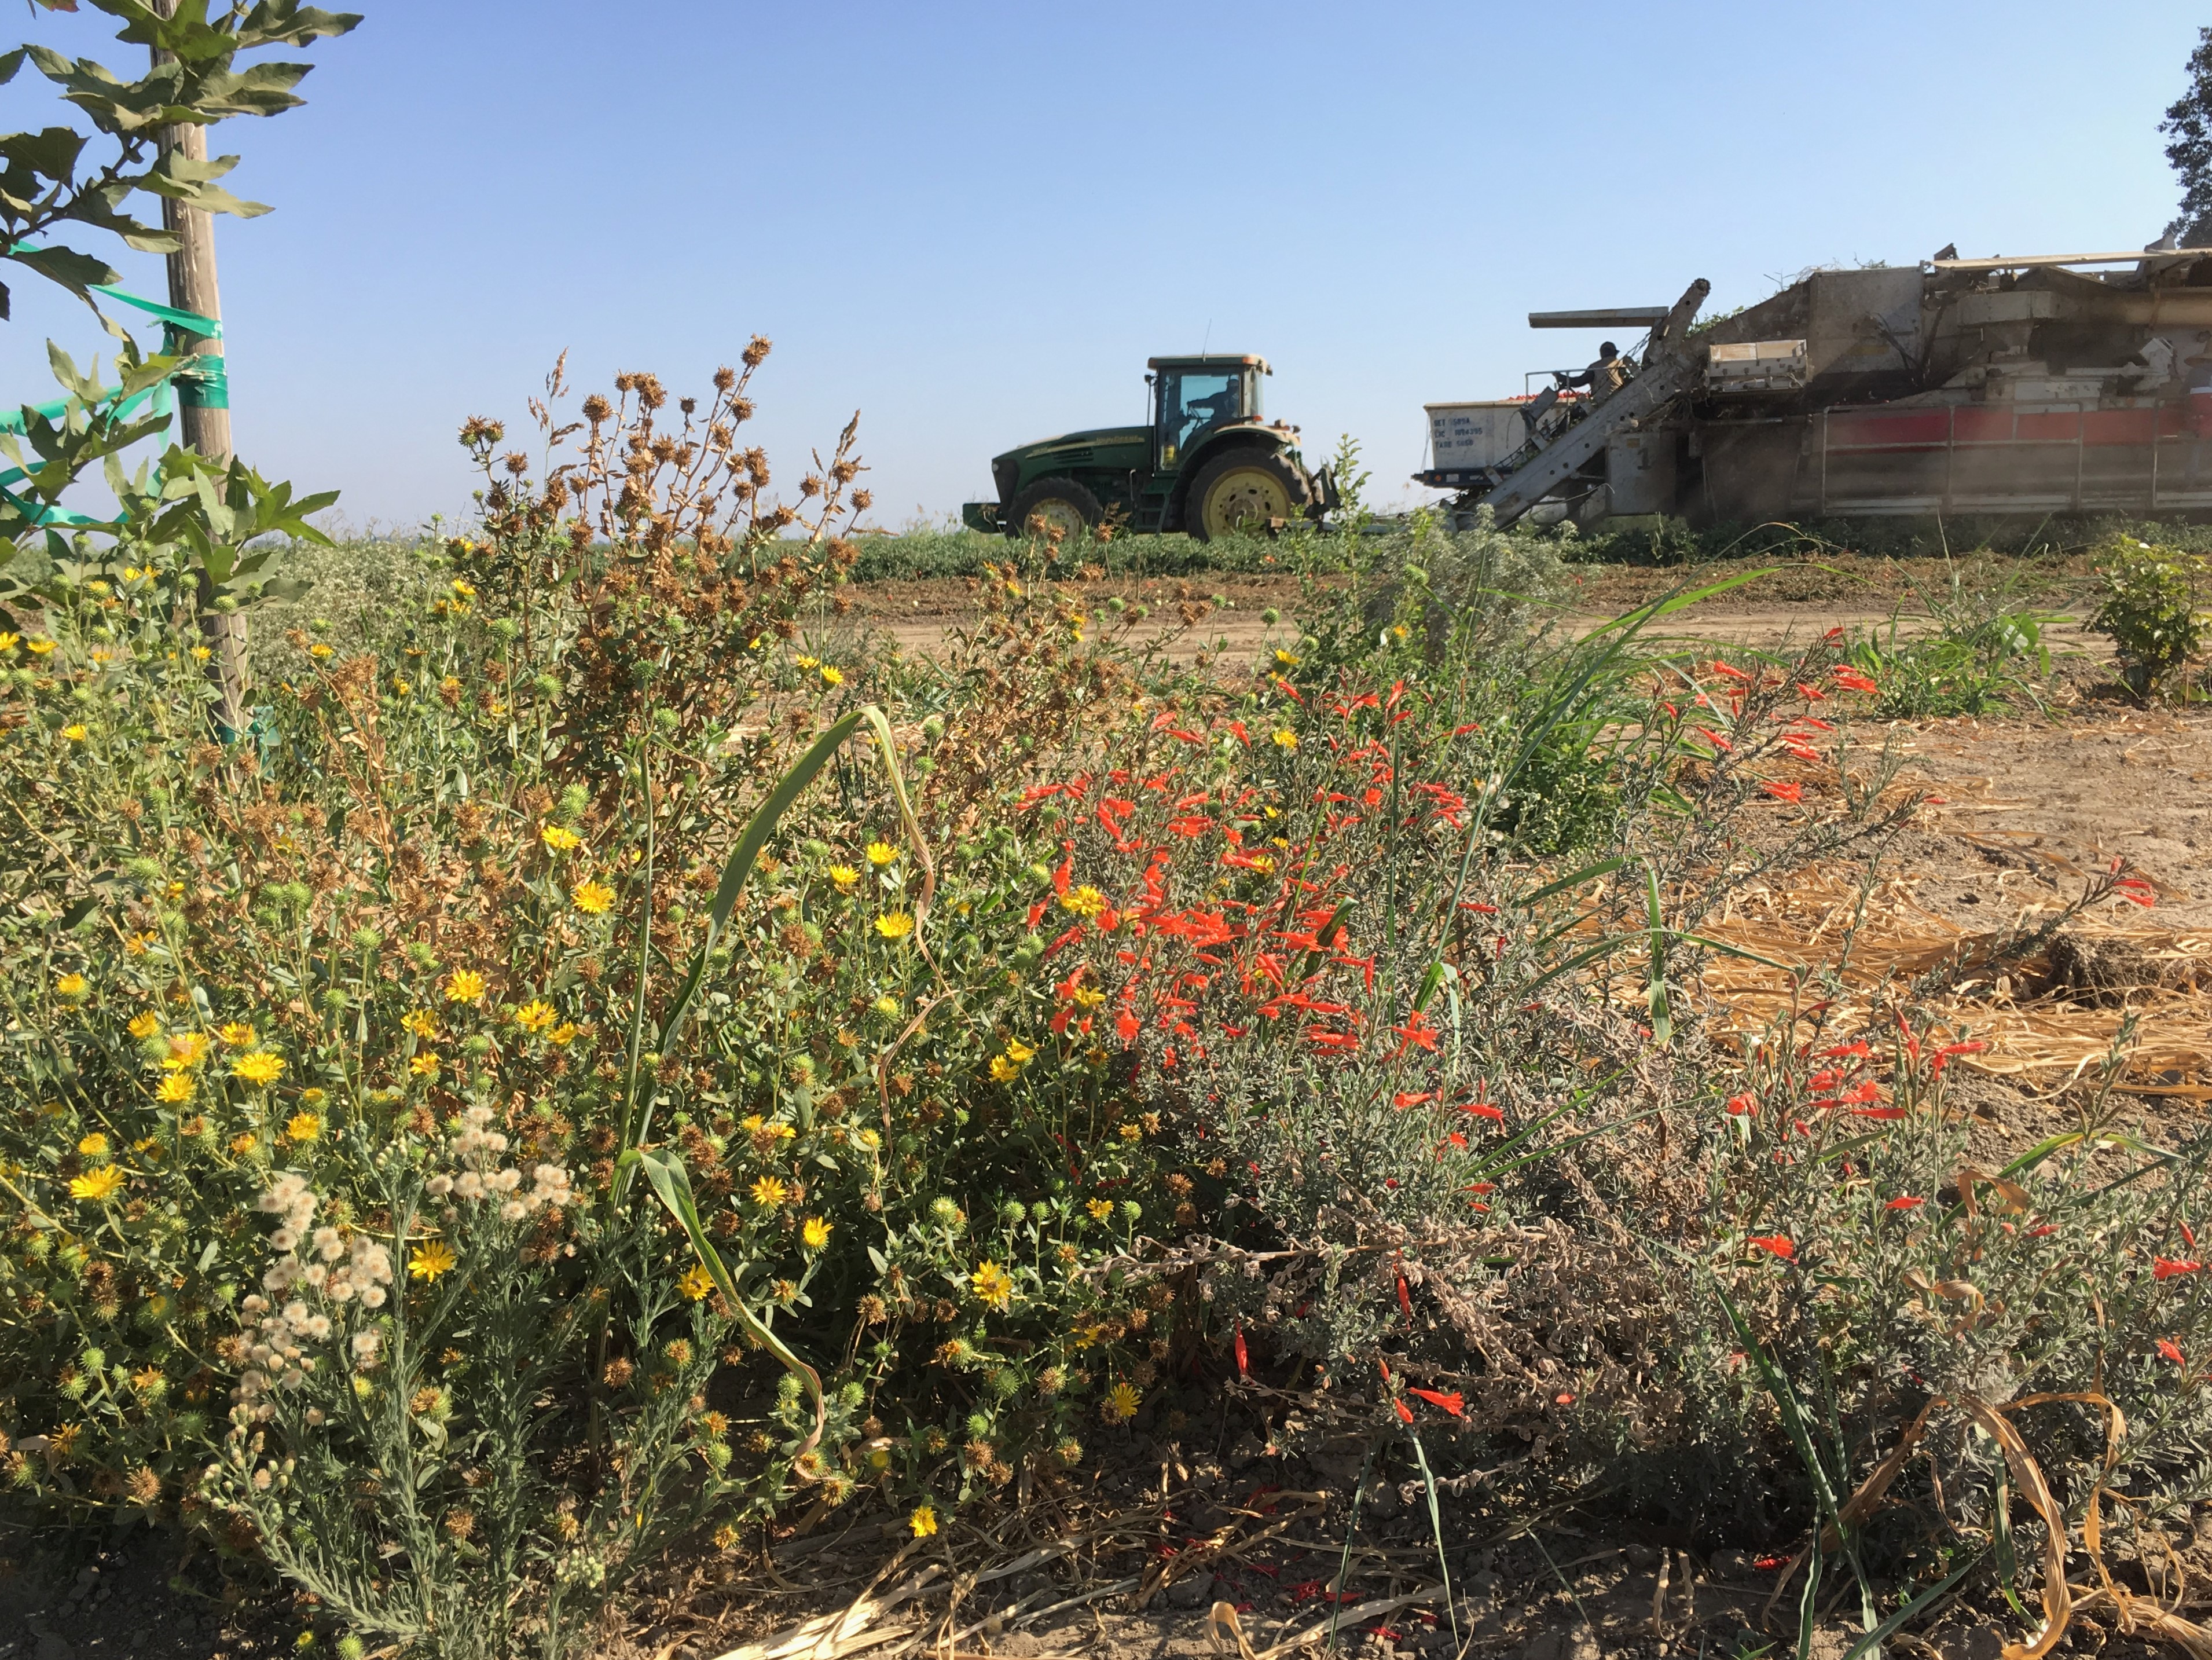 A brown, arid landscape is colored by a hedgerow with a diversity of flowers, including some vibrant red blooms. Behind the hedgerow is a tractor and some other large farming equipment.